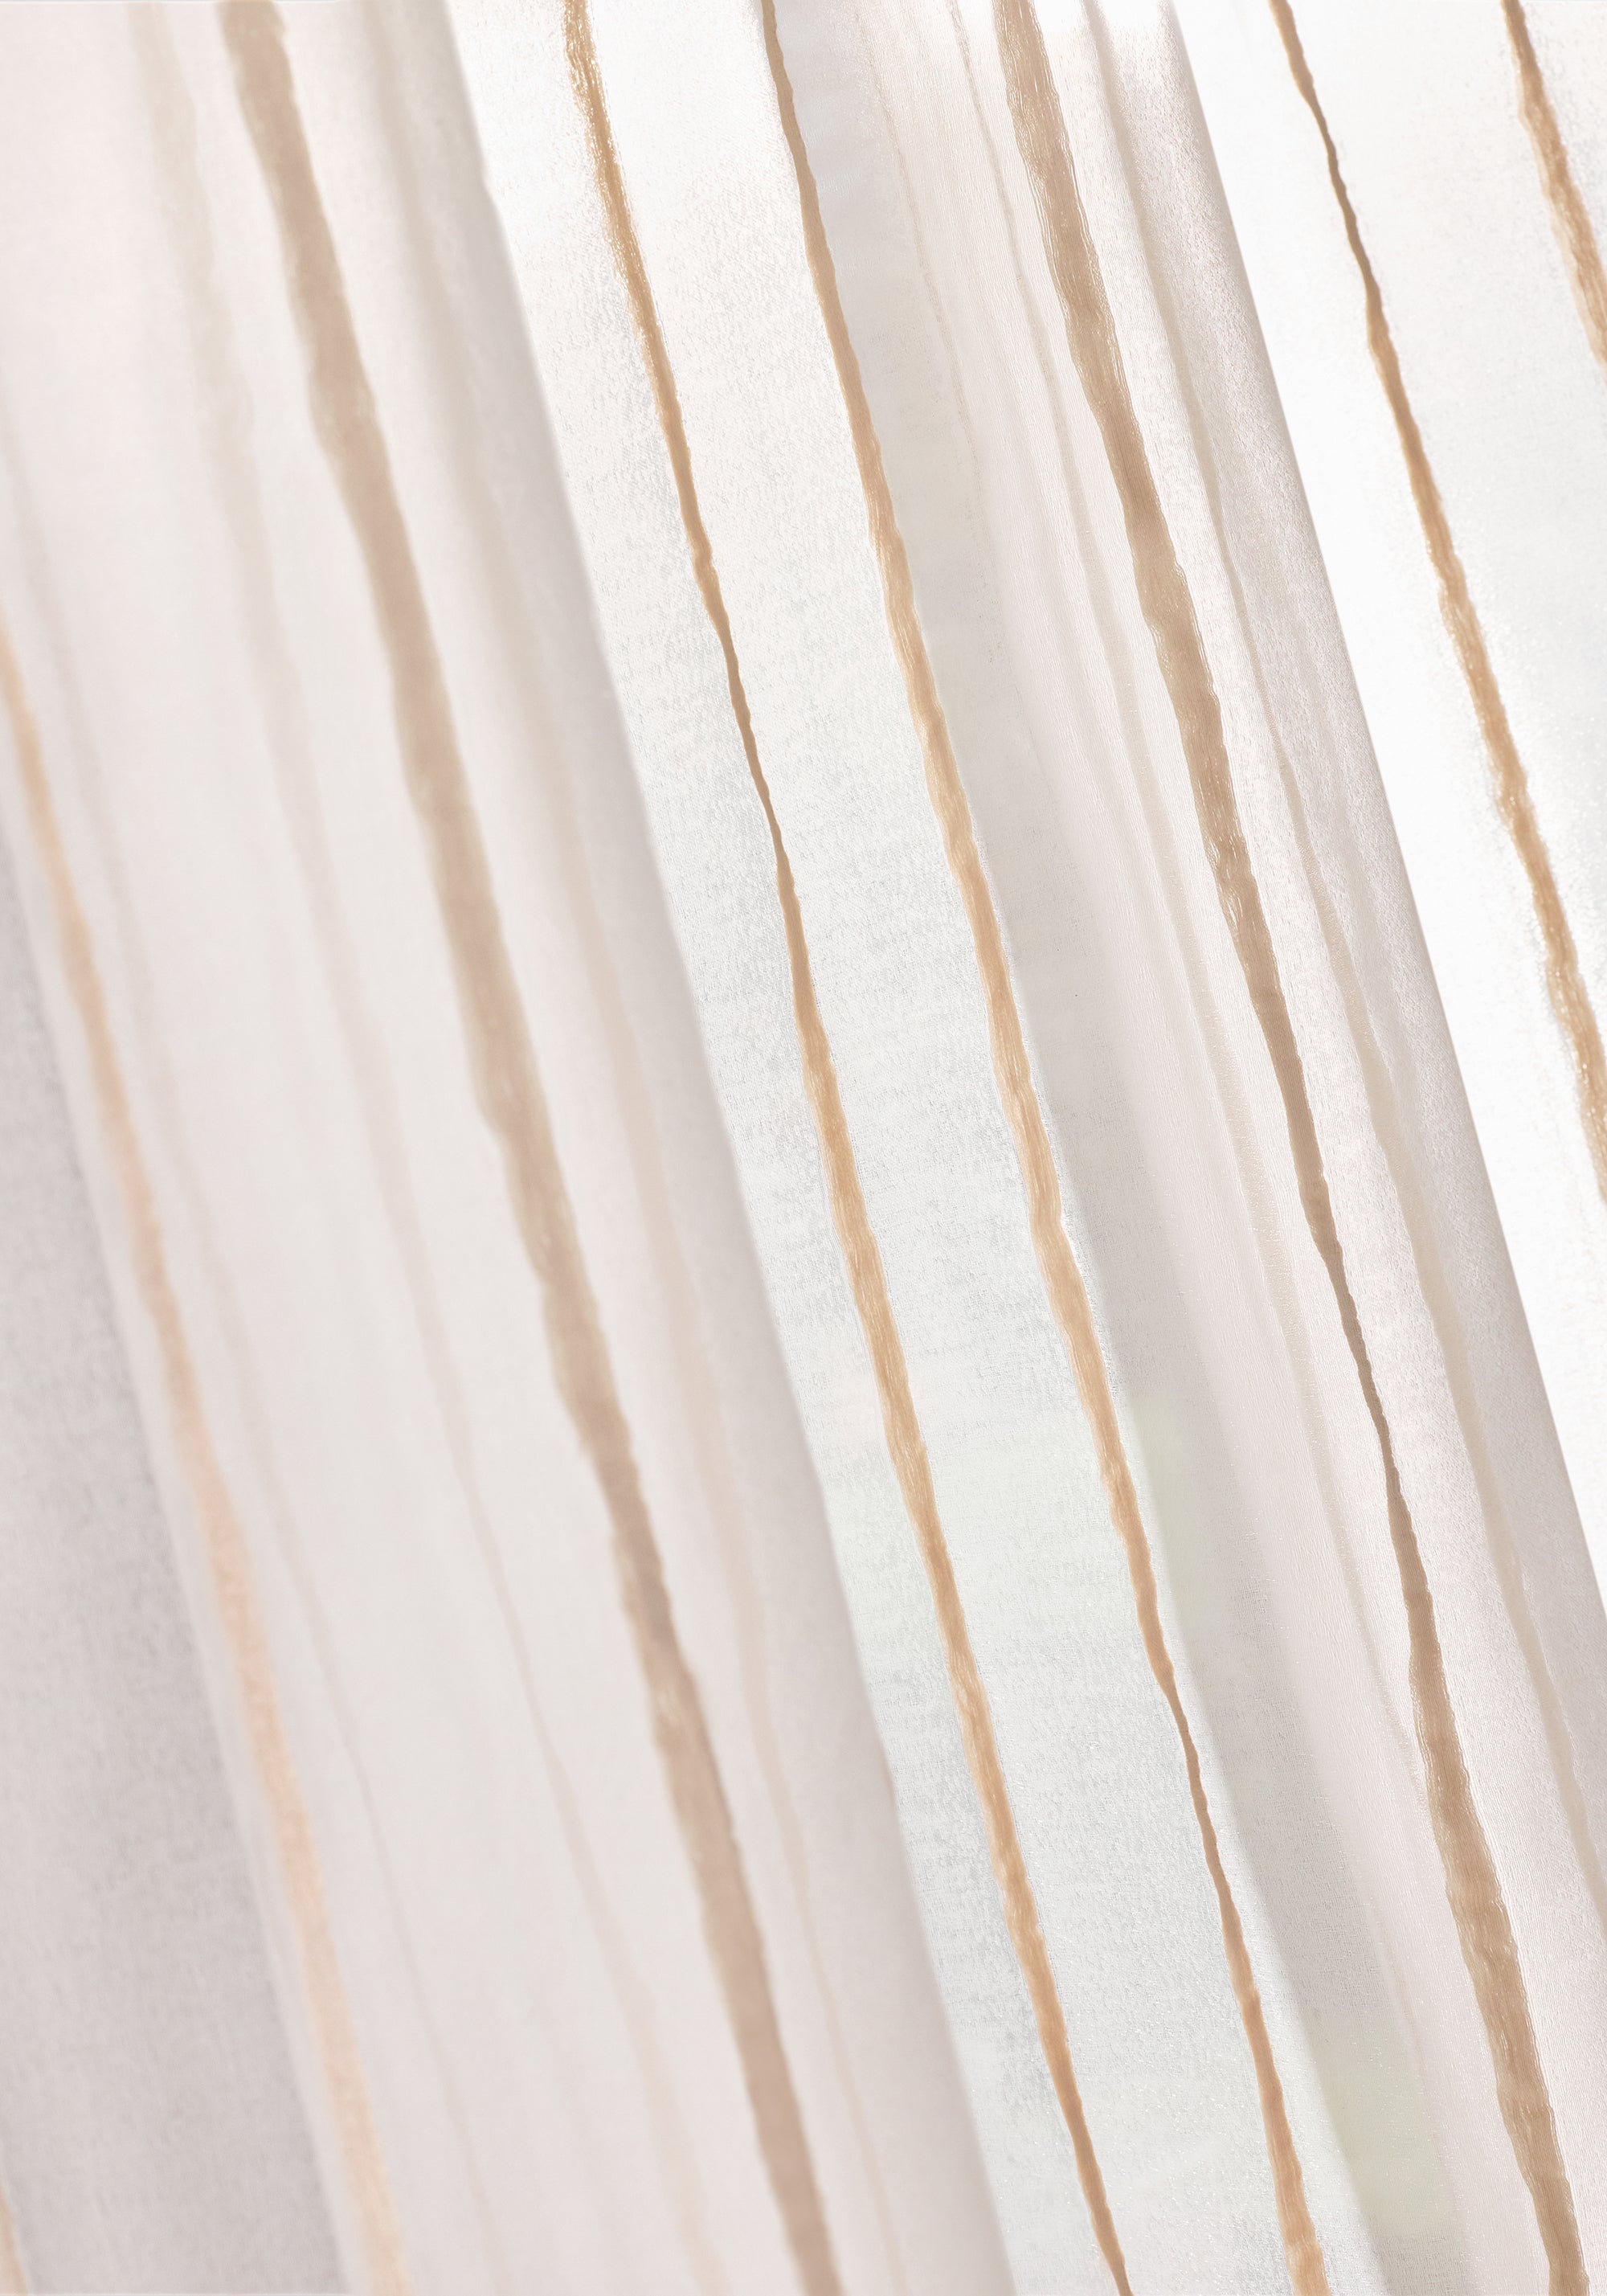 Up close Sheer in Lumina fabric in rose gold color - pattern number FWW8233 - by Thibaut in the Aura collection